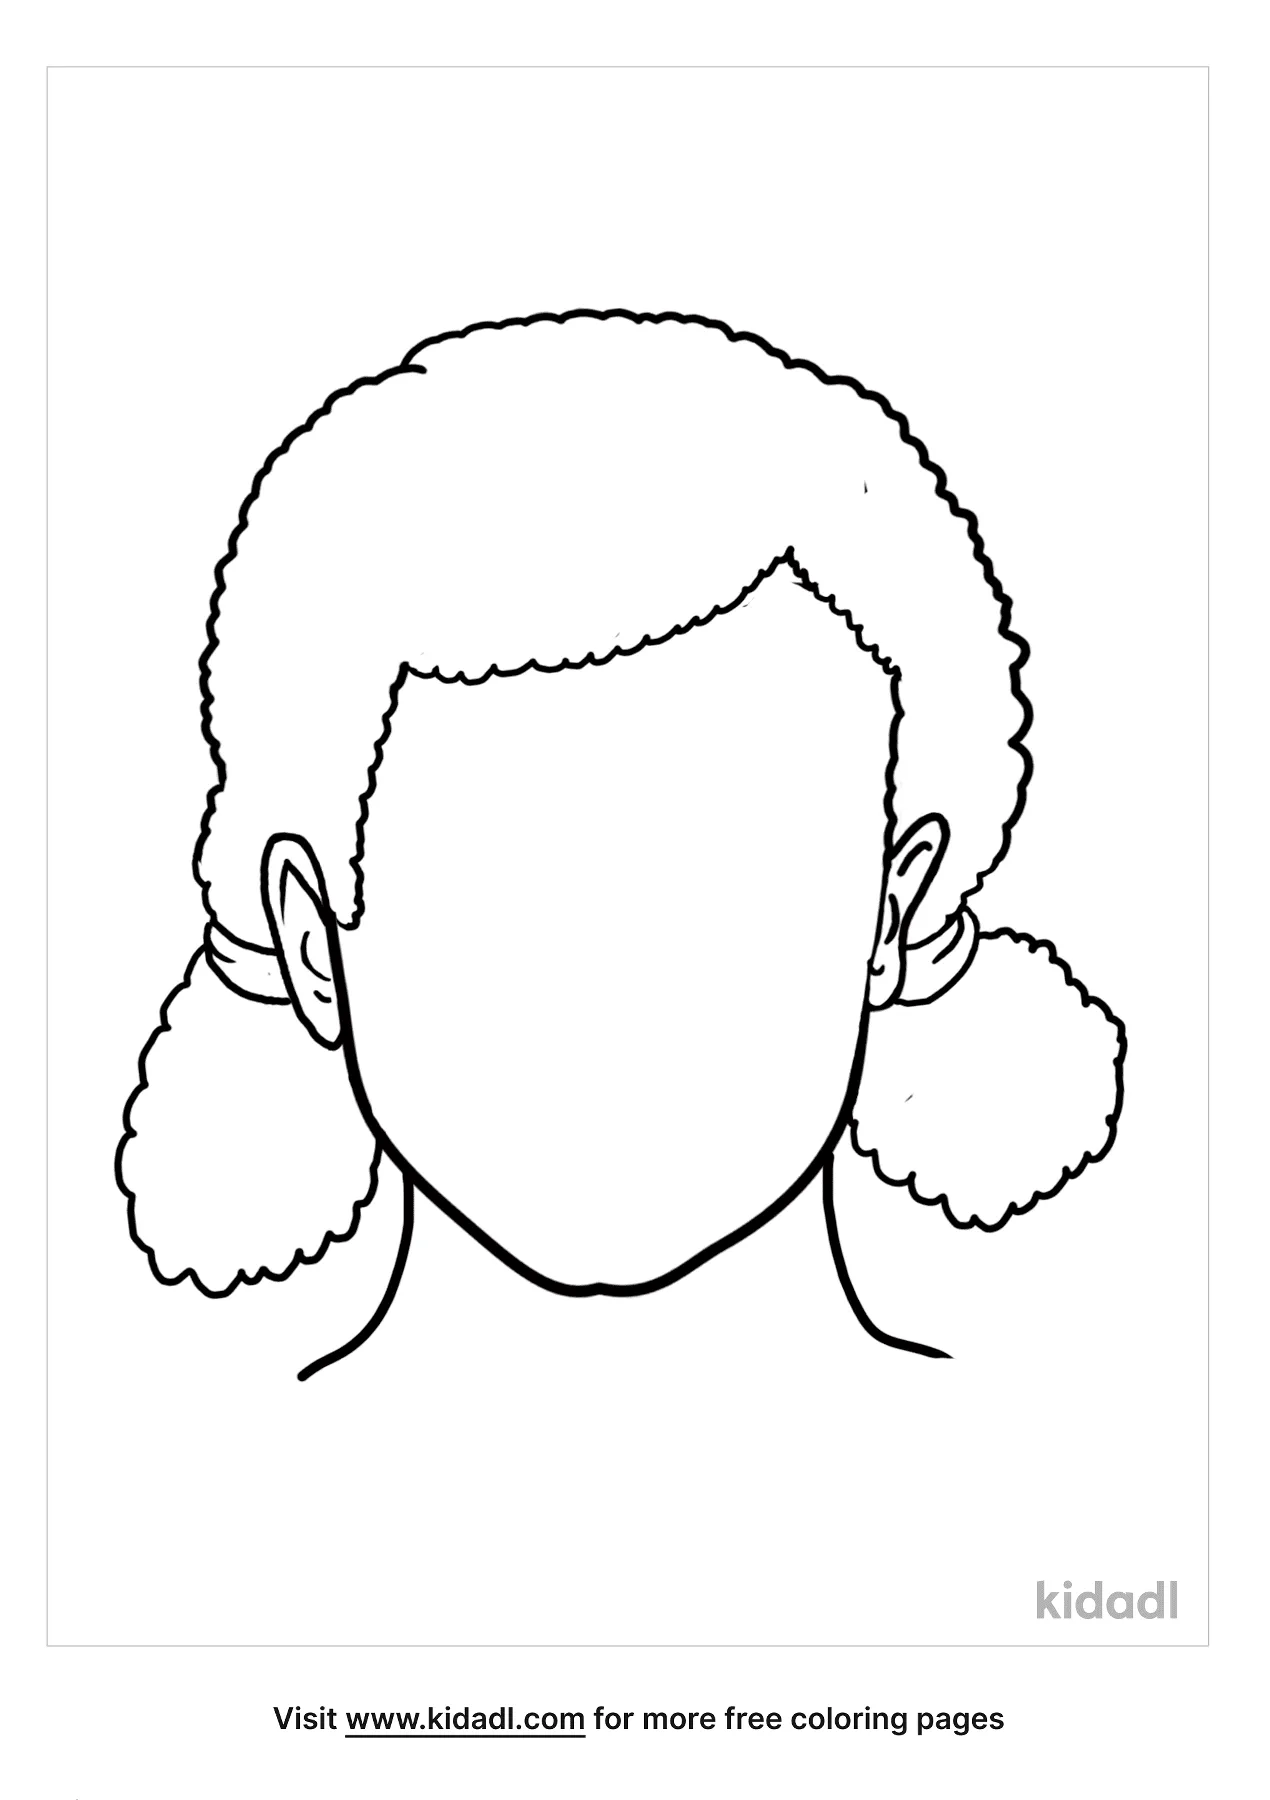 Blank Face Coloring Pages  Free People Coloring Pages  Kidadl Throughout Blank Face Template Preschool